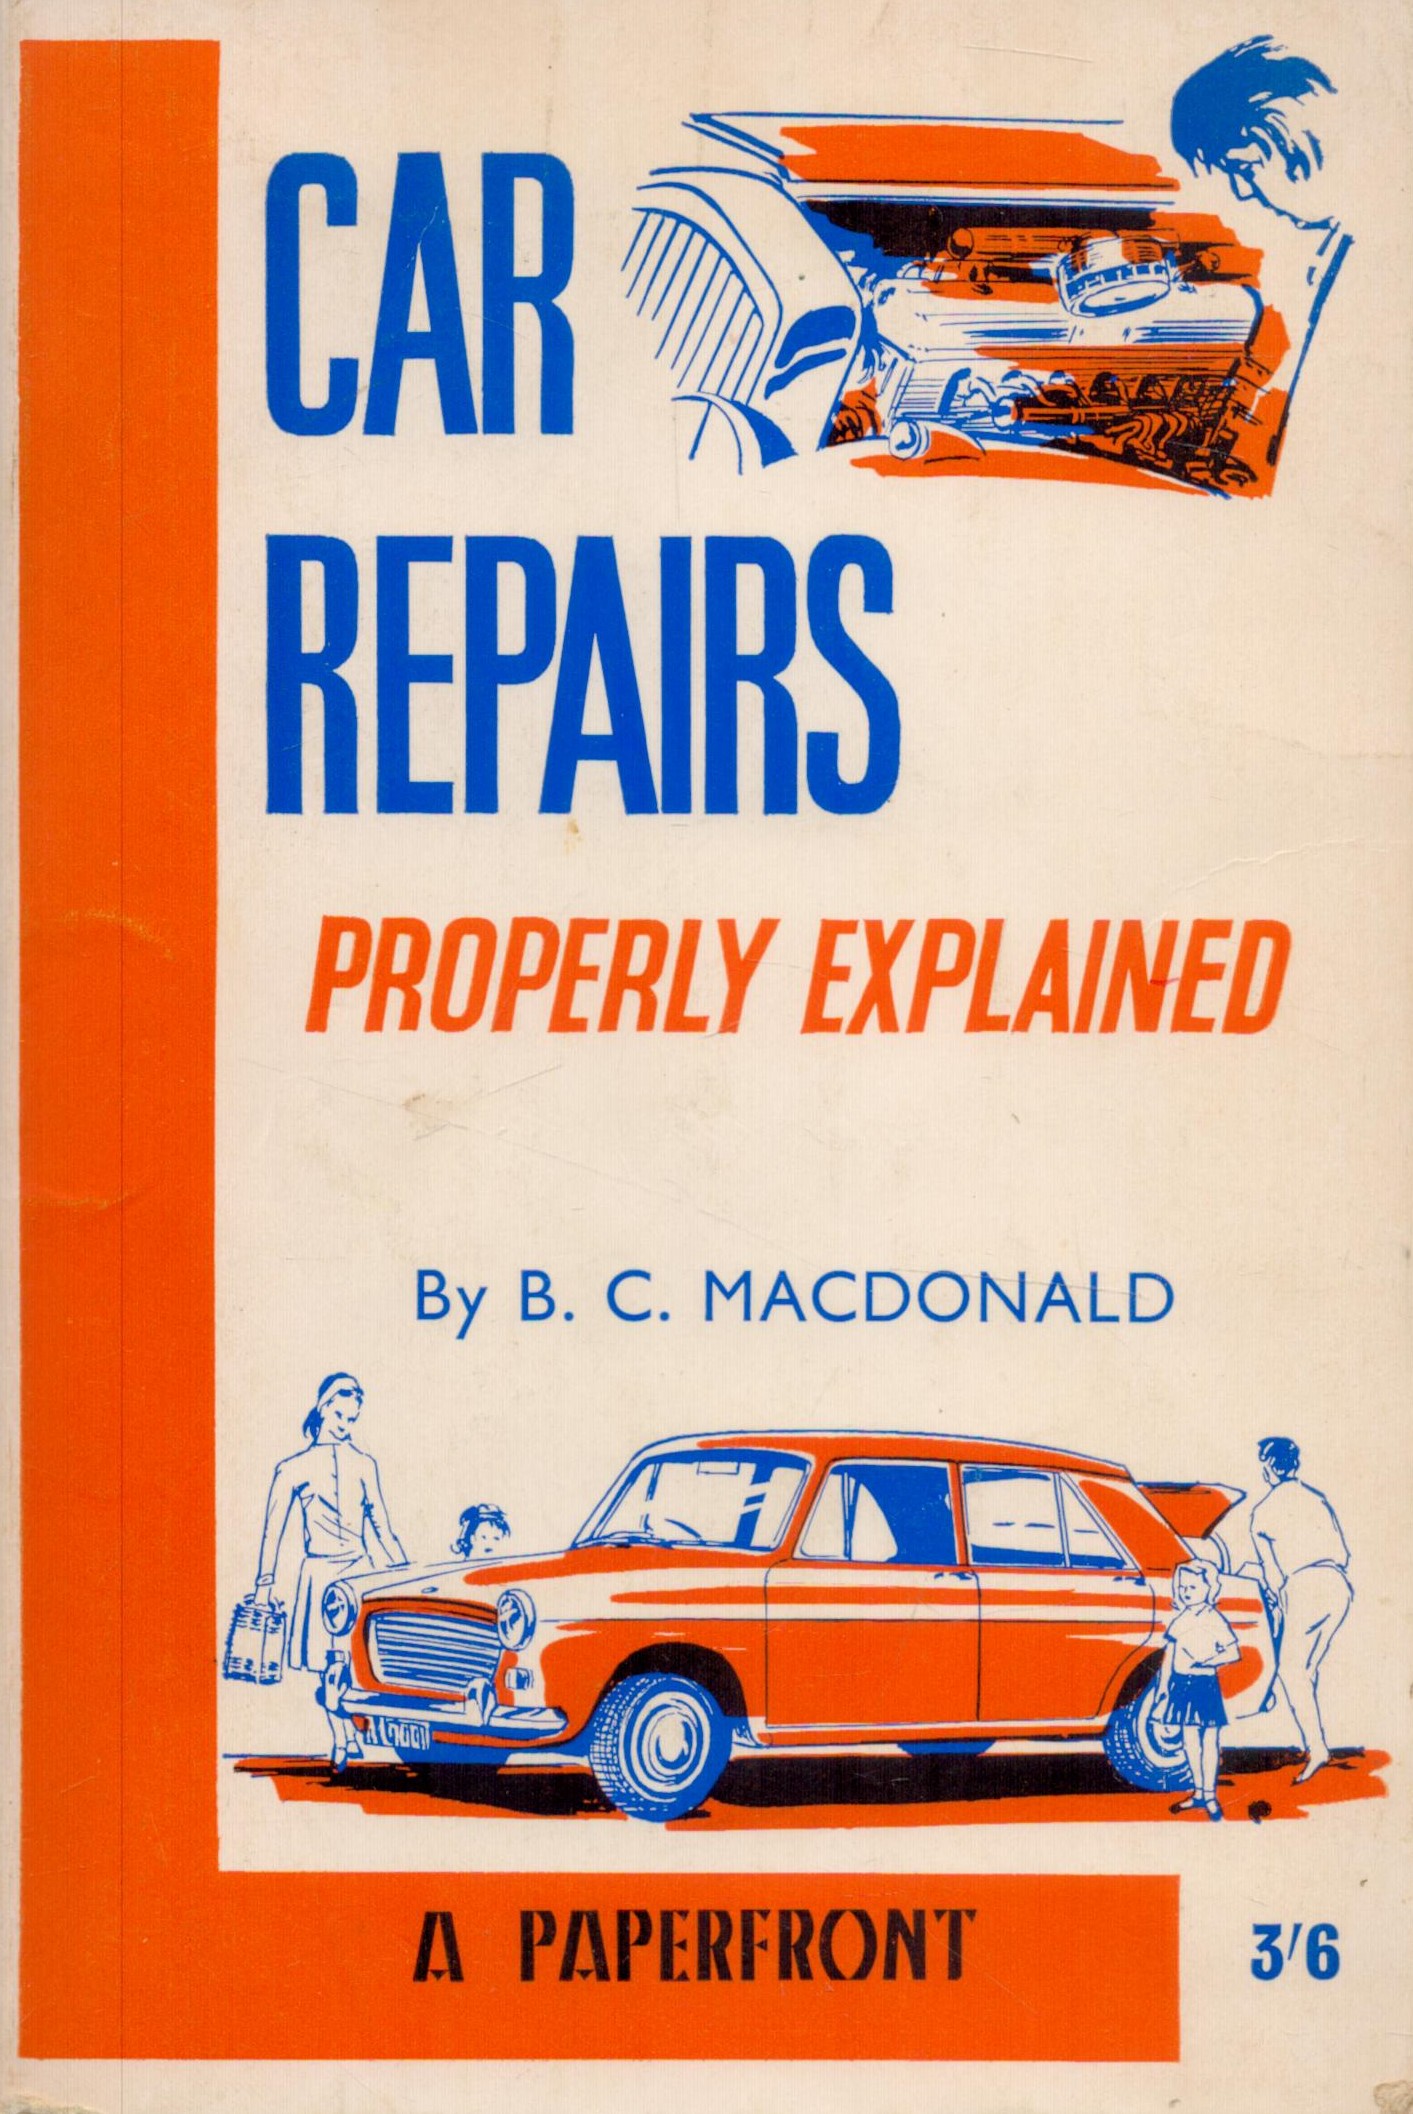 Car Repairs Properly Explained by B C Macdonald 1968 Fourth Edition Softback Book with 192 pages